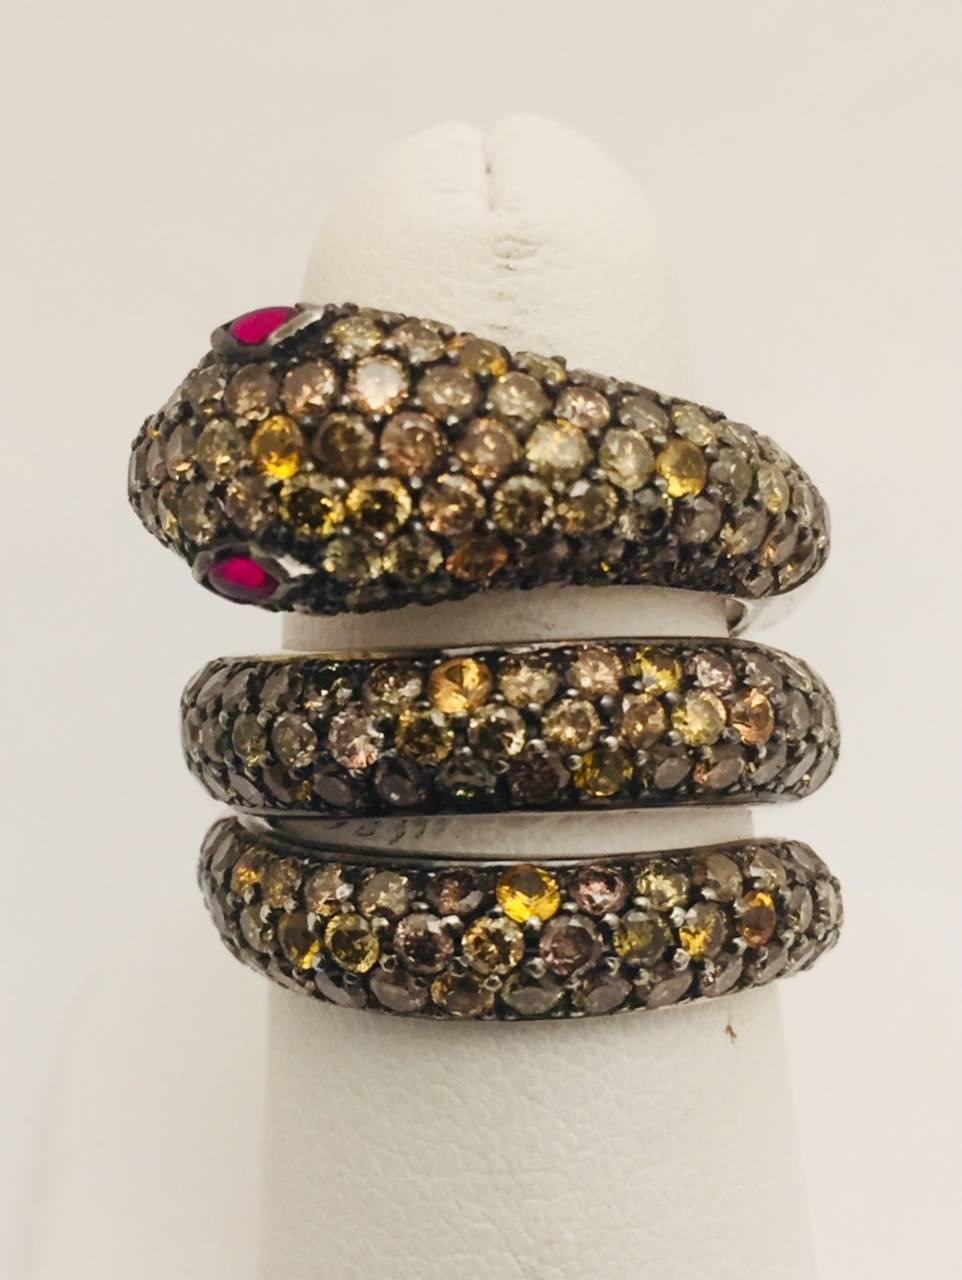 Snakes take a major role in many of the world's myths and legends.  Early on, snakes vaulted into the forefront of jewelry design and recently have become a celebrity craze.  Beautifully crafted in 18 karat white gold, this striking serpent is